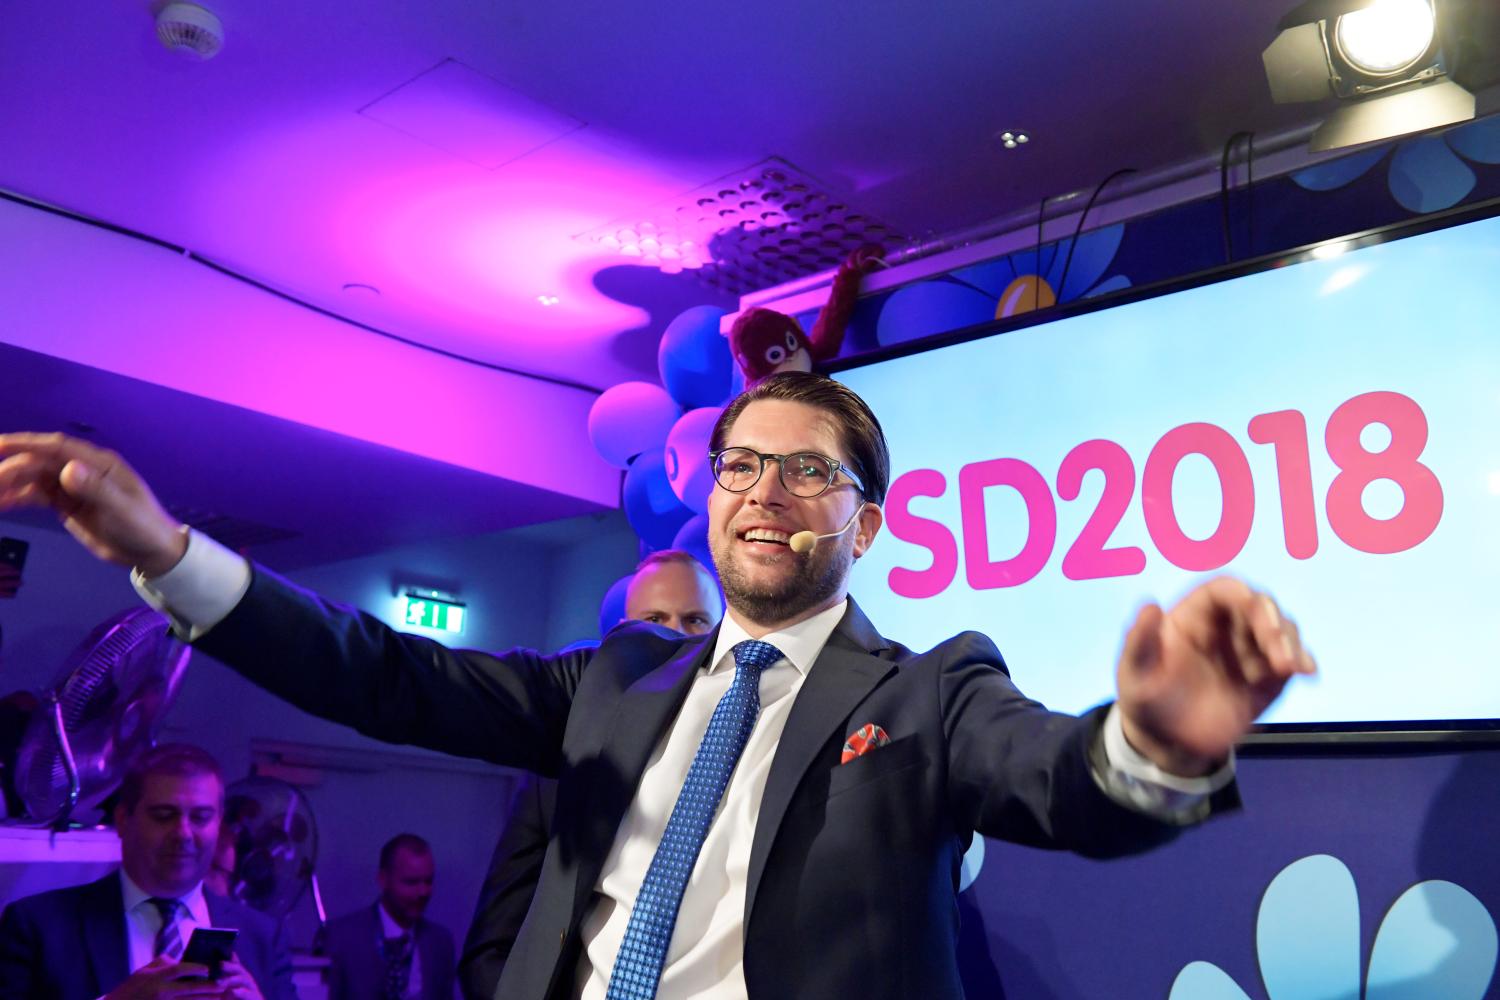 The Rise of Sweden Democrats: Islam, Populism and the End of Swedish  Exceptionalism